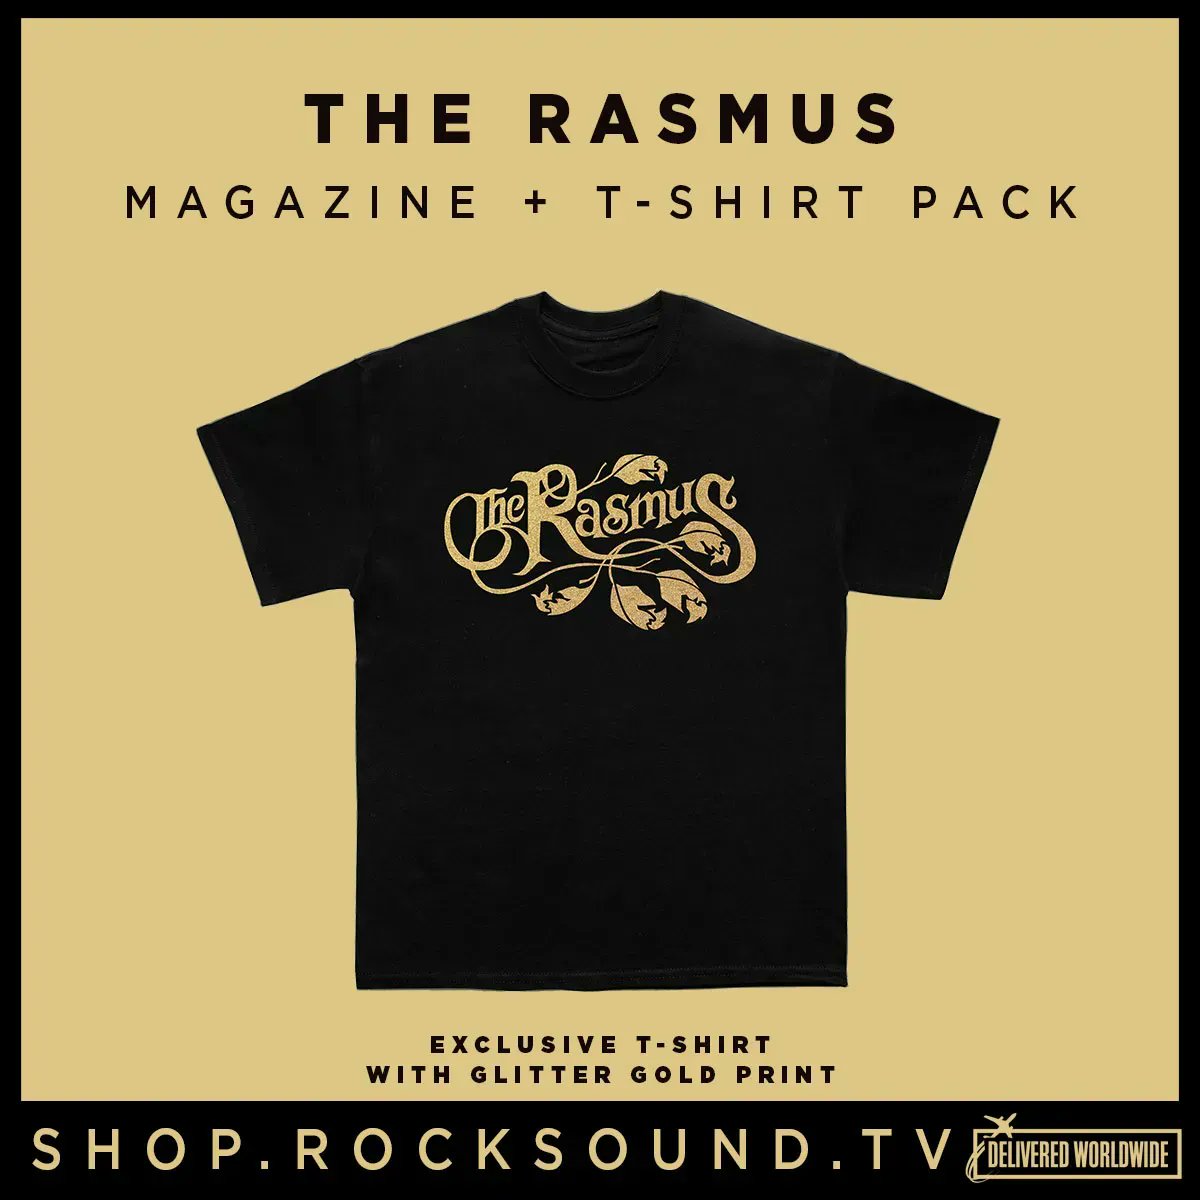 An exclusive The Ramus t-shirt, with gold glitter print, available only with the band's edition of Rock Sound. Grab it now from store.rocksound.tv/therasmus-tw